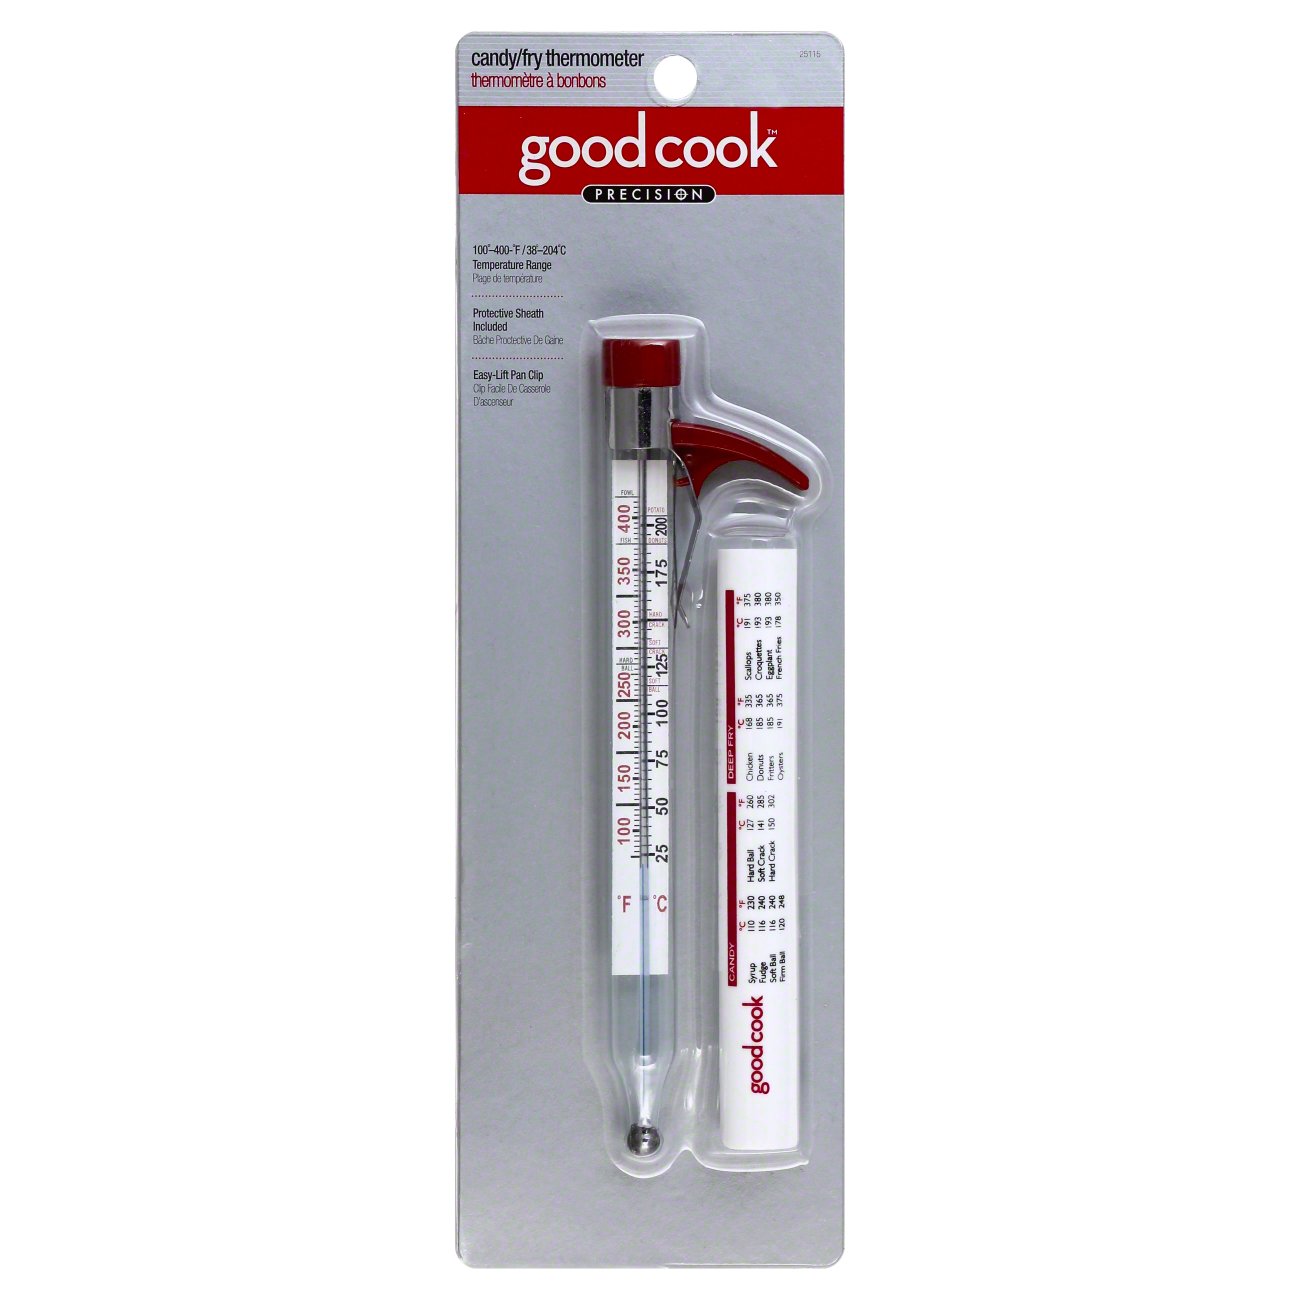 Good Cook Precision Candy/ Fry Thermometer